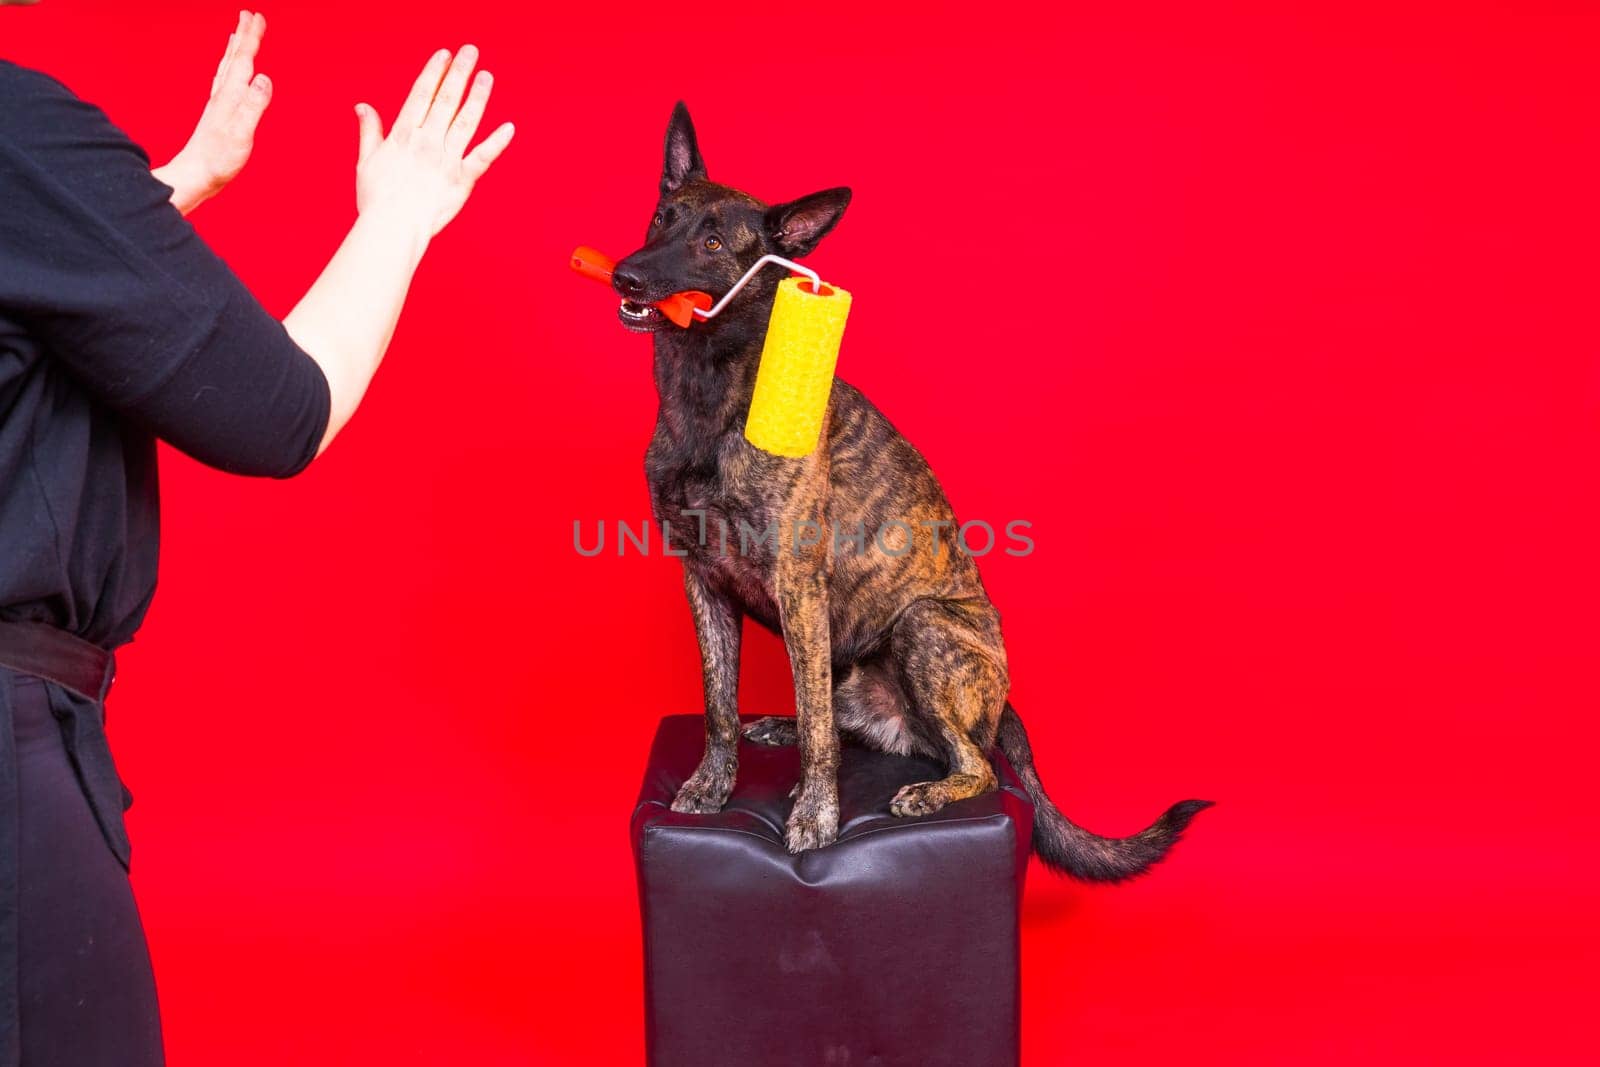 A dog builder is holding a roller brusht. Red yellow background. Isolated. Dutch shepherd by Zelenin